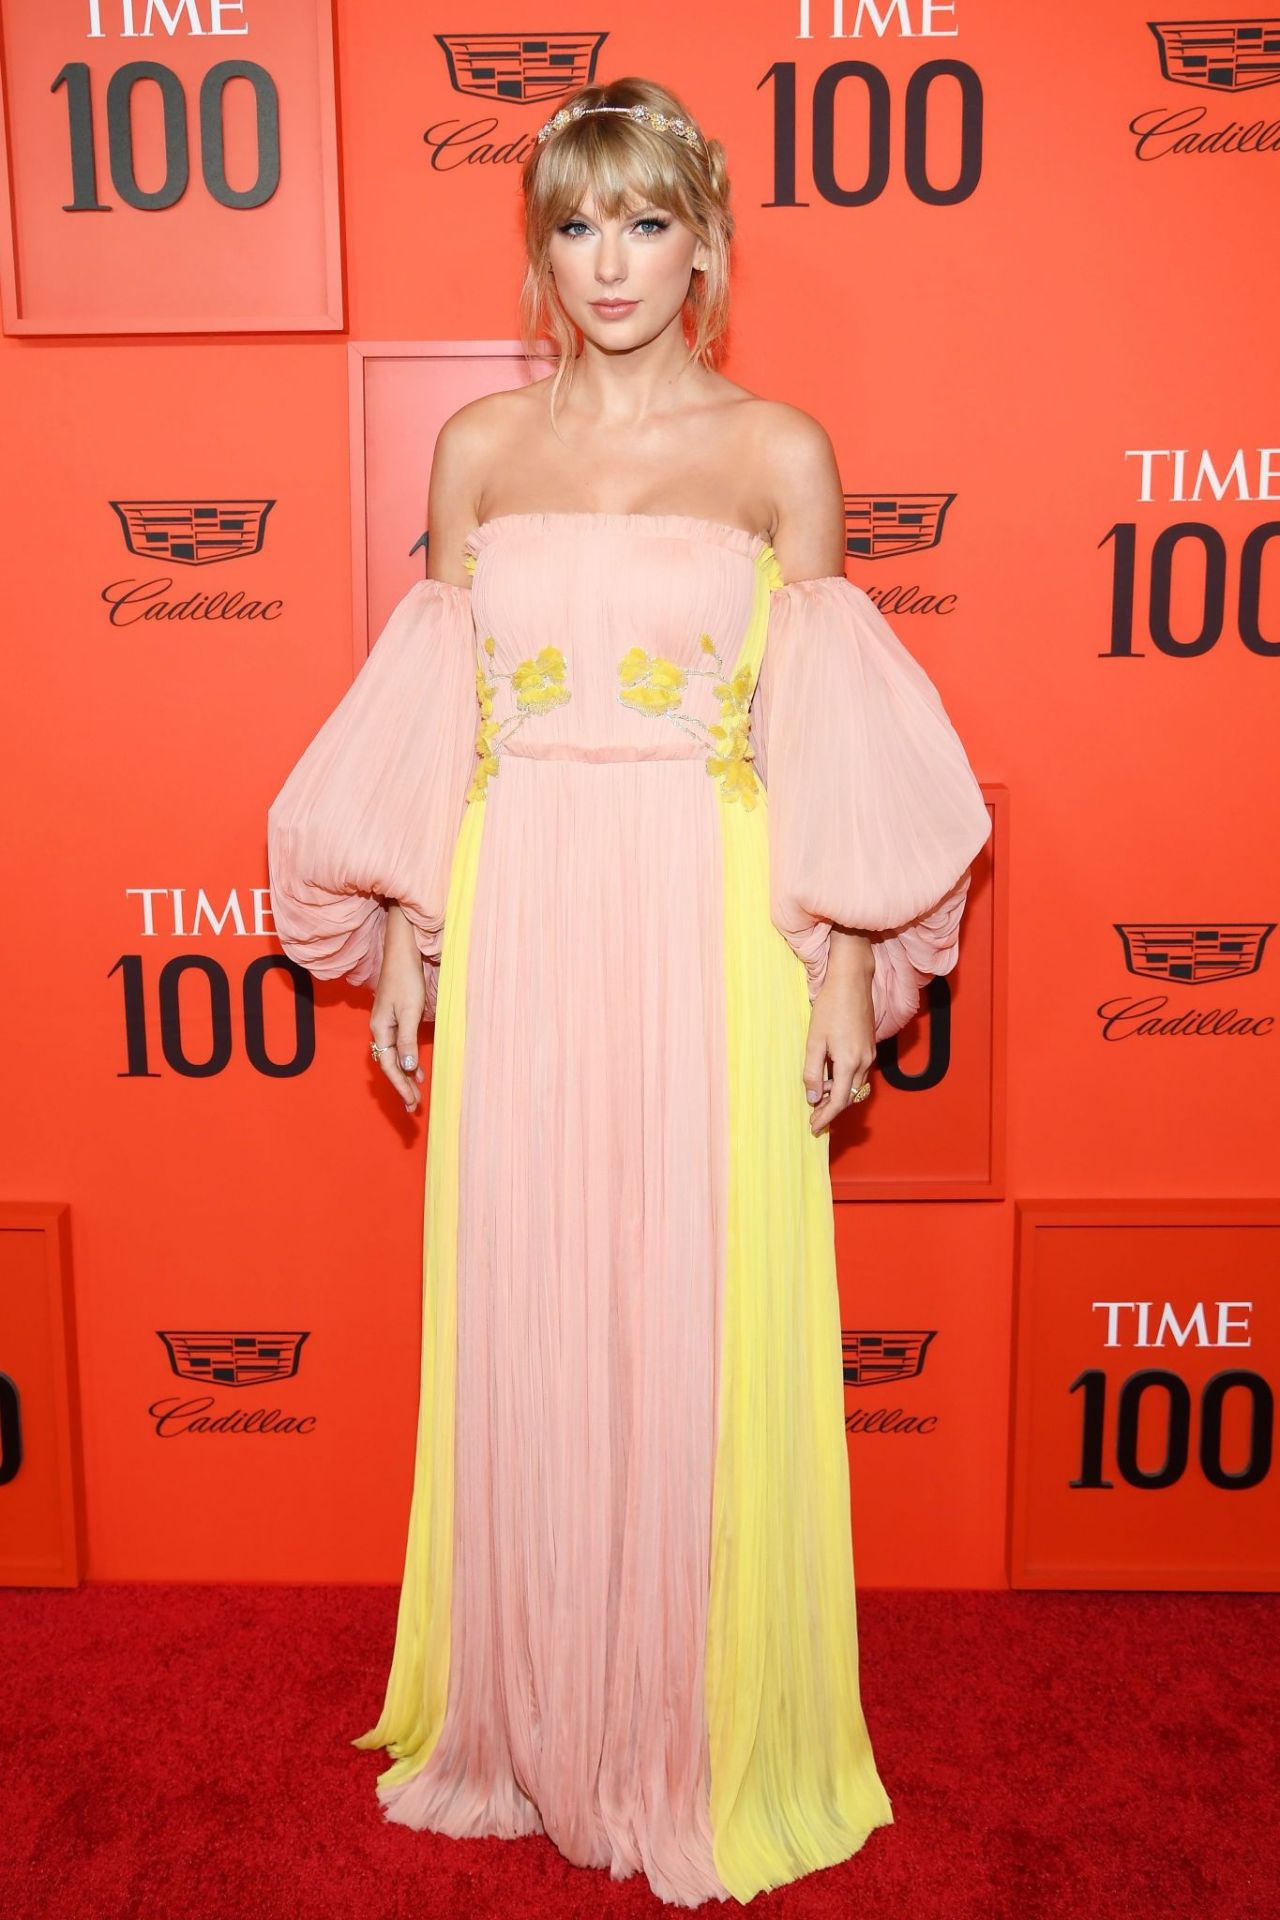 Taylor Swift STUNNING and beautiful at TIME 100 Gala in NYC